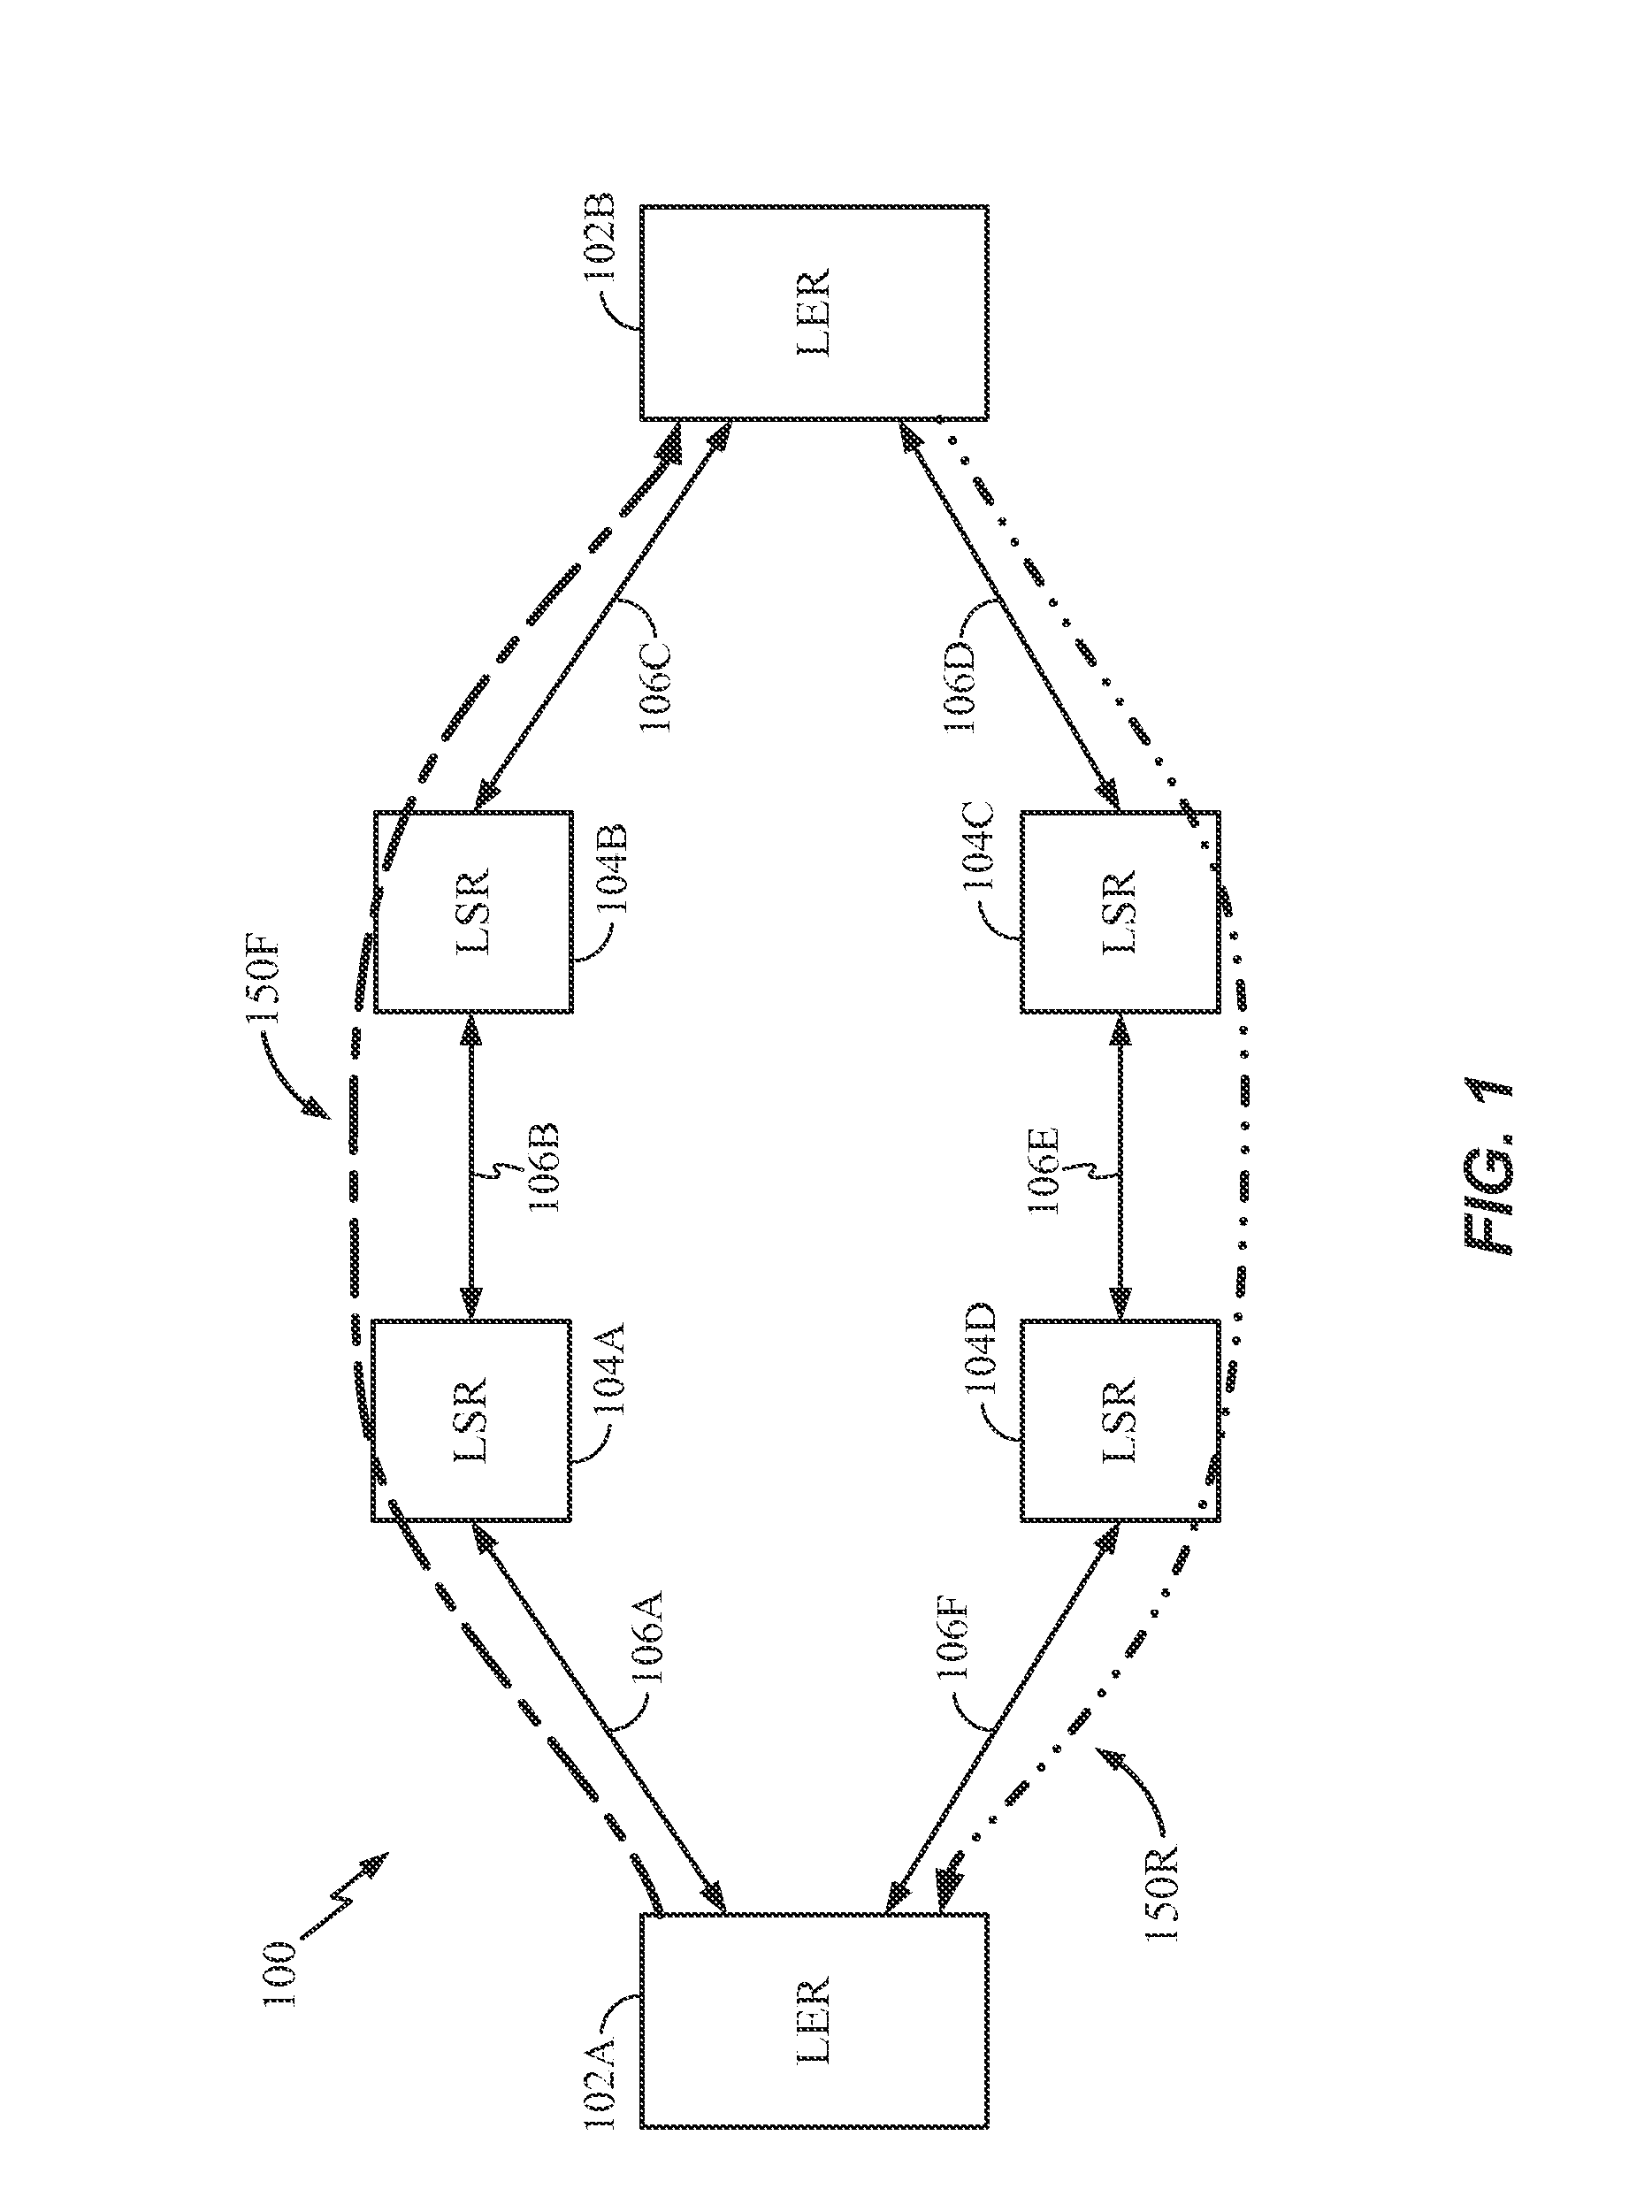 Method and apparatus for managing end-to-end consistency of bi-directional mpls-tp tunnels via in-band communication channel (g-ach) protocol